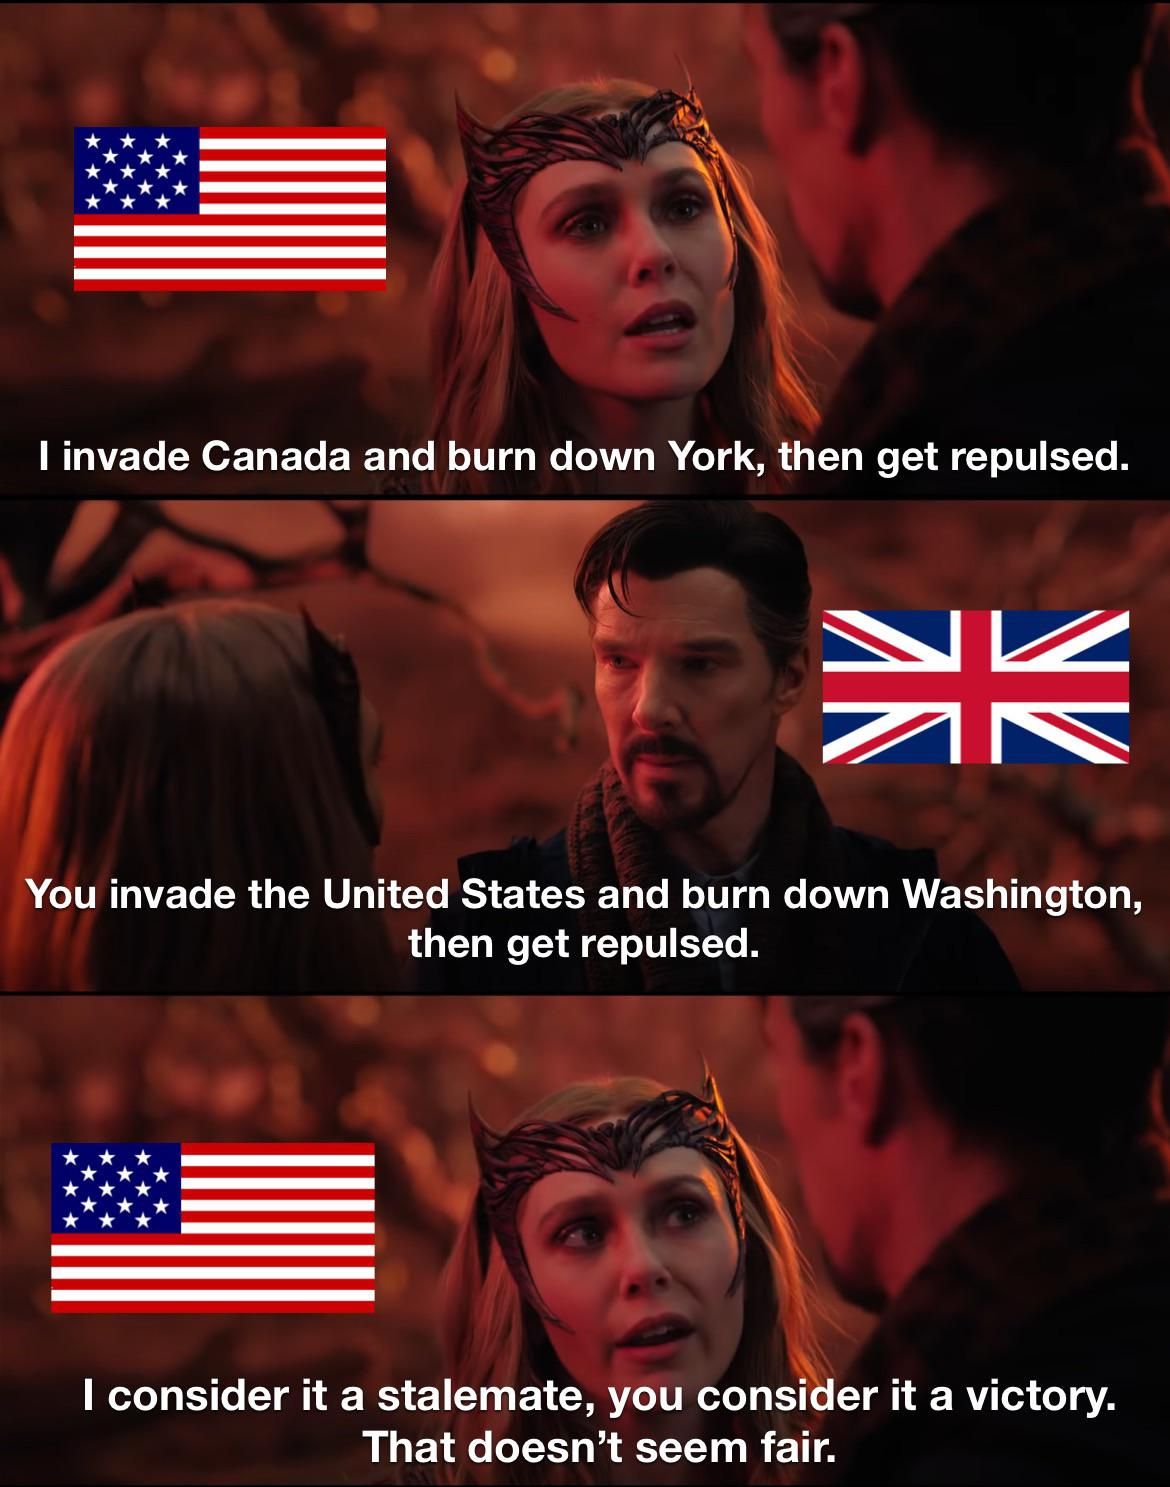 There was nothing clear cut about the War of 1812